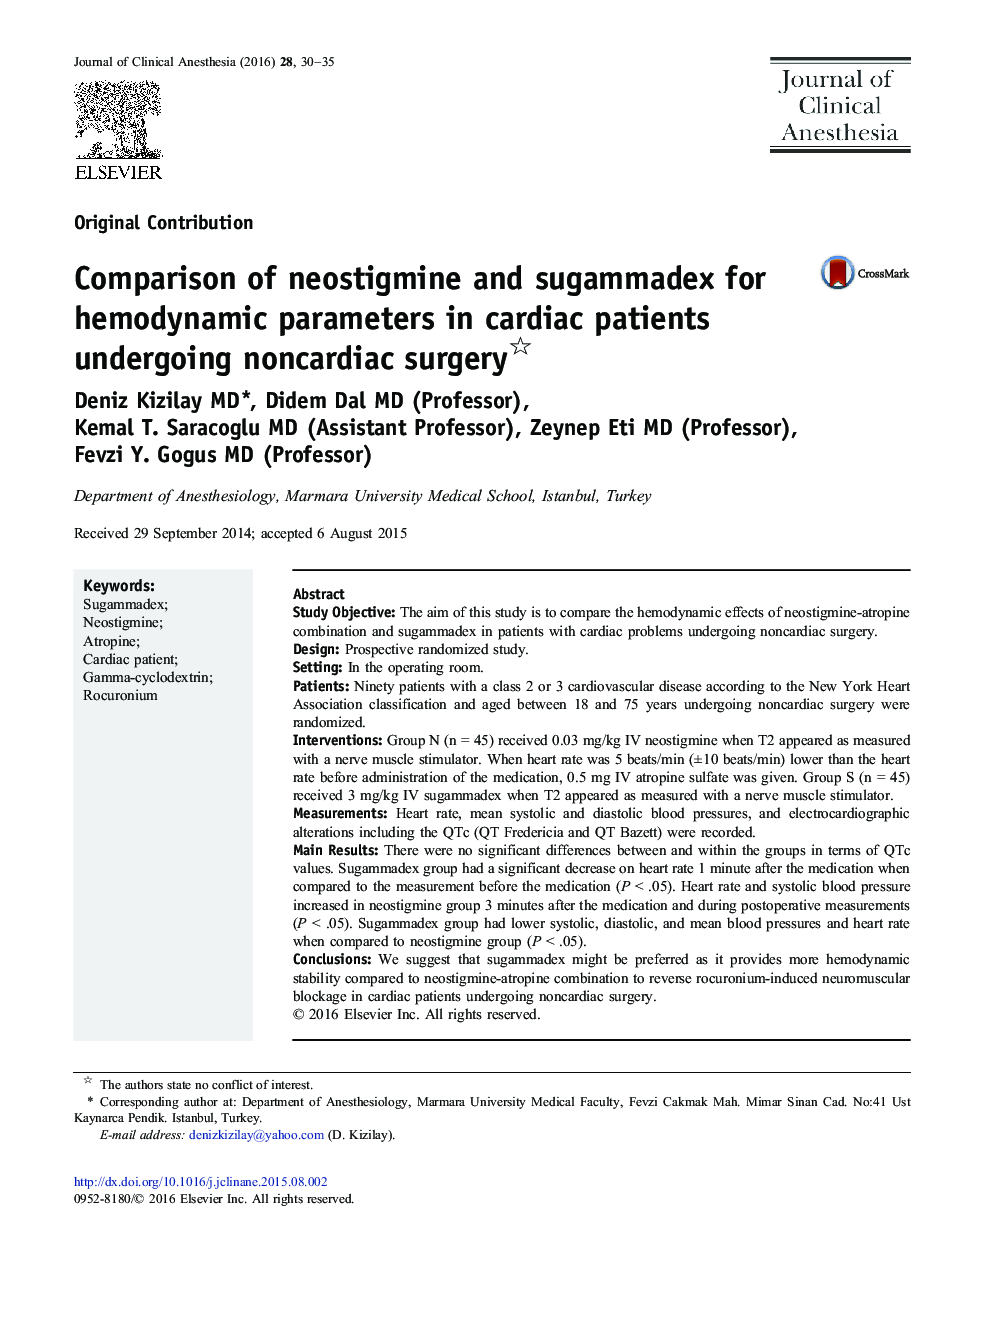 Comparison of neostigmine and sugammadex for hemodynamic parameters in cardiac patients undergoing noncardiac surgery 